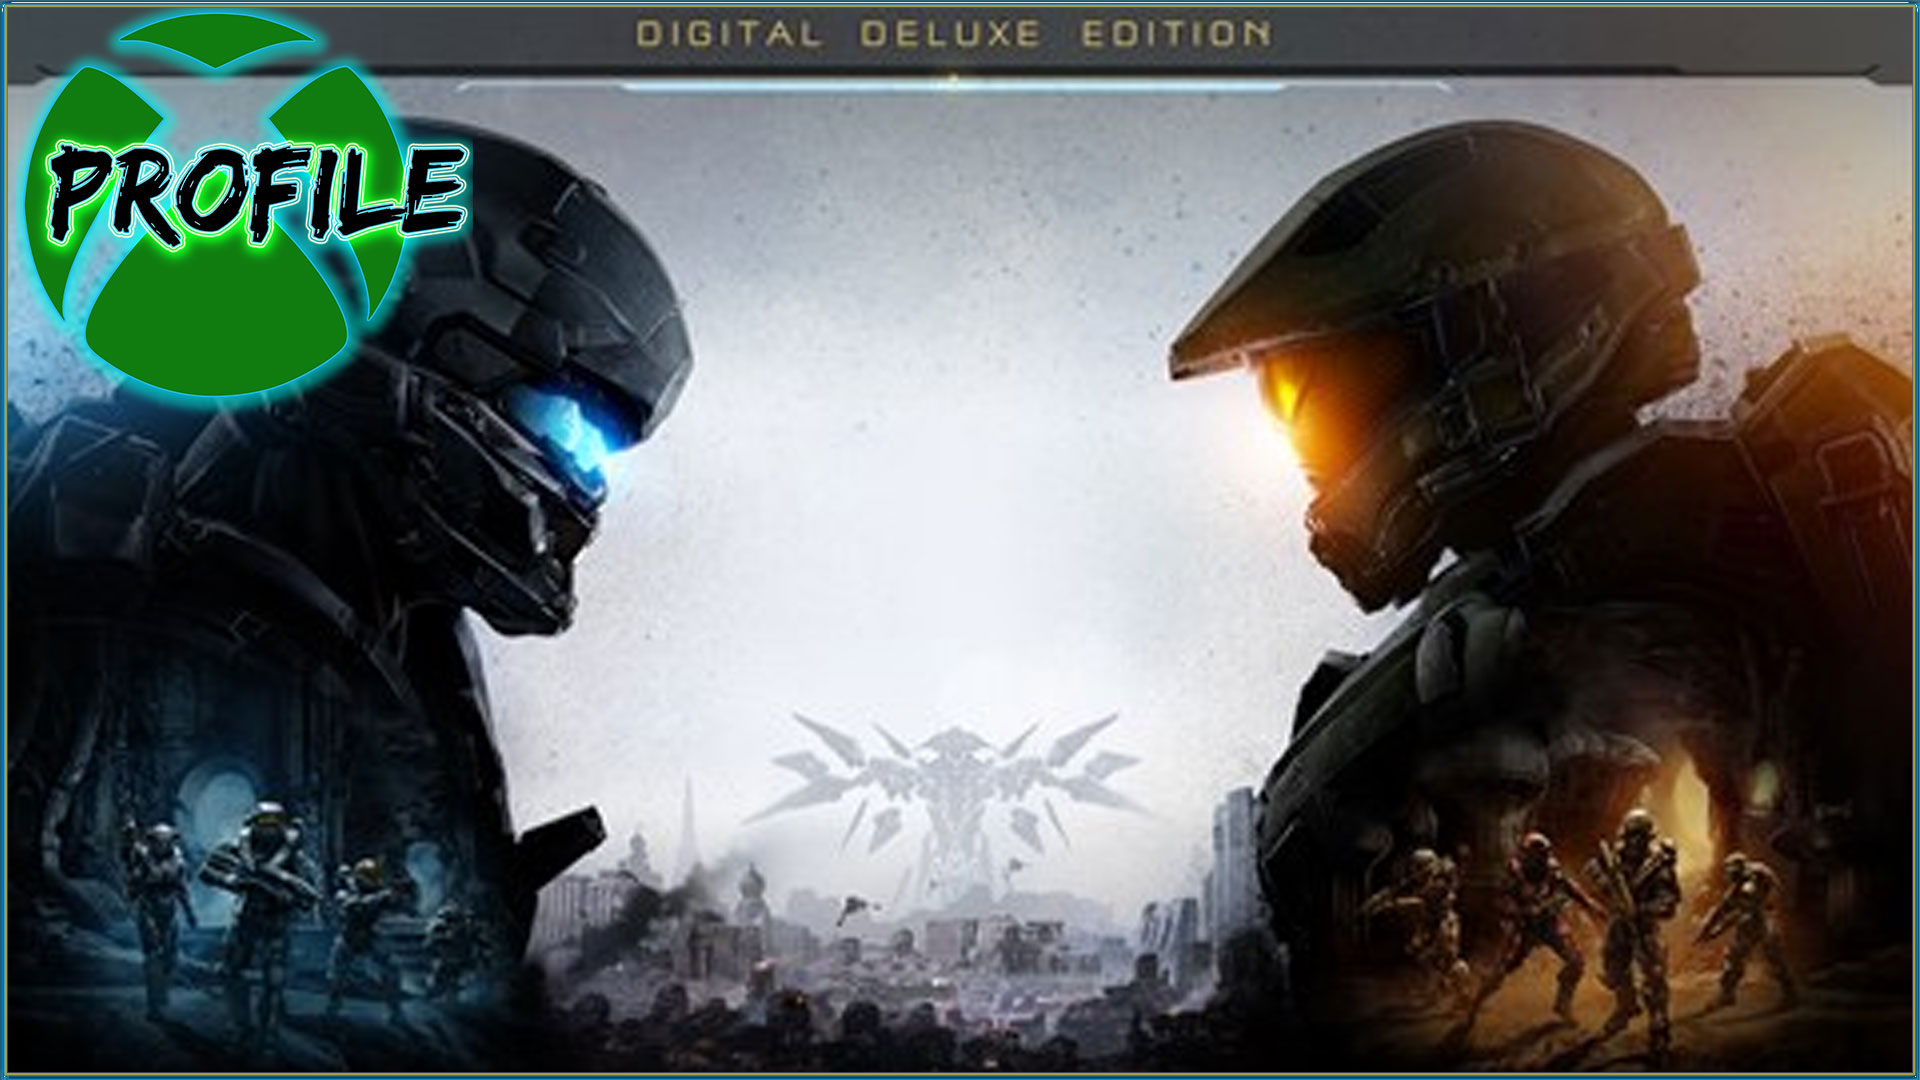 Halo 5 Guardians Digital Deluxe Edition XBOX ONE